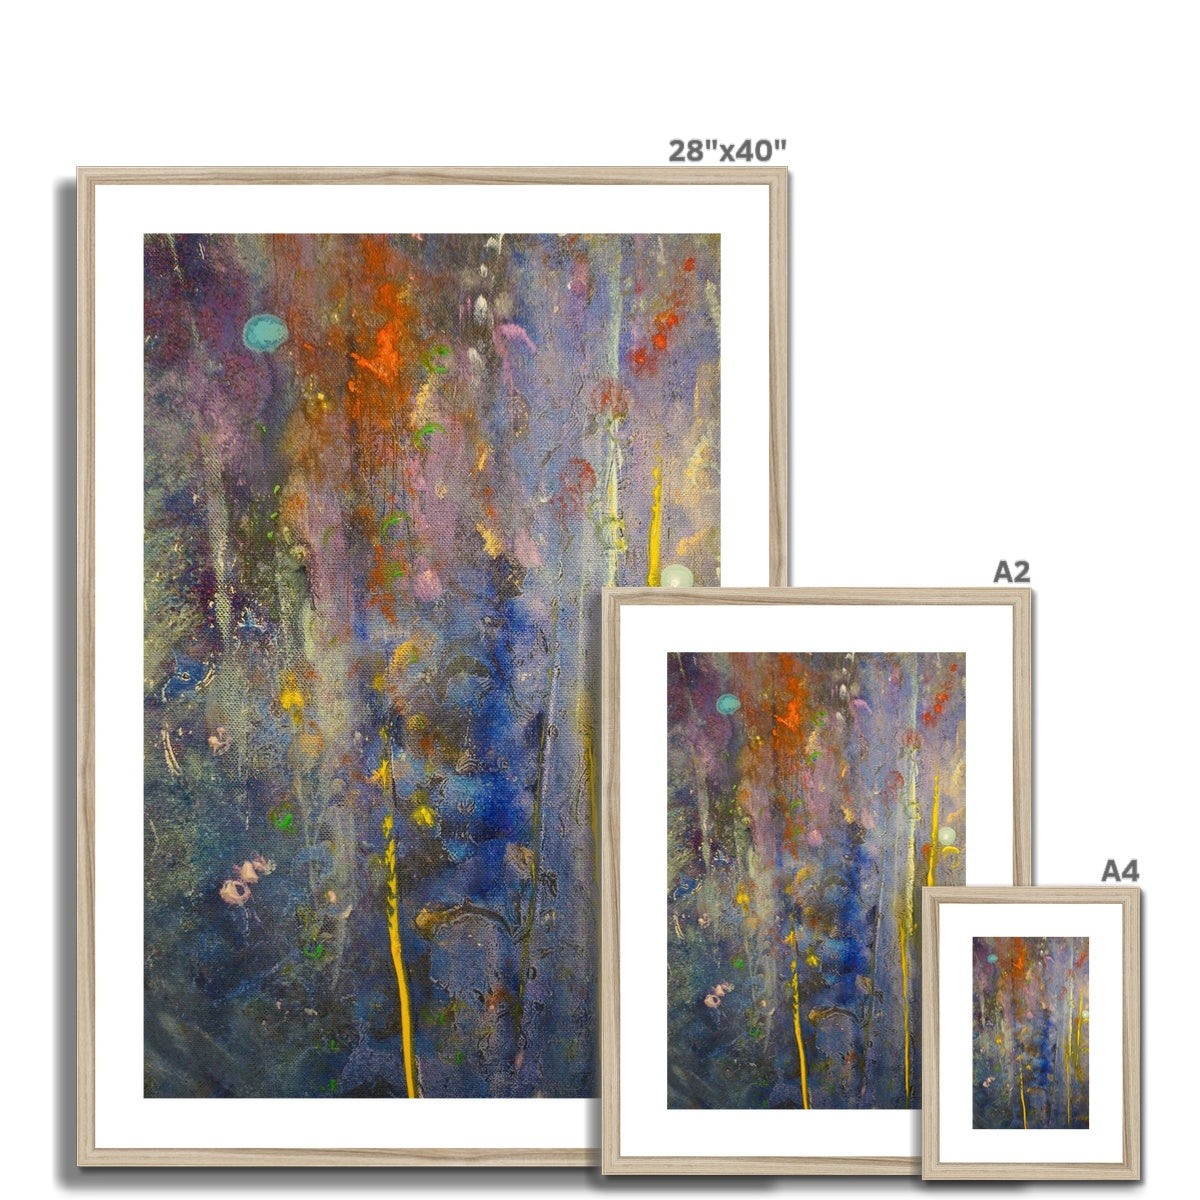 Cairngorms Waterfall Abstract Painting | Framed & Mounted Prints From Scotland-Framed & Mounted Prints-Abstract & Impressionistic Art Gallery-Paintings, Prints, Homeware, Art Gifts From Scotland By Scottish Artist Kevin Hunter